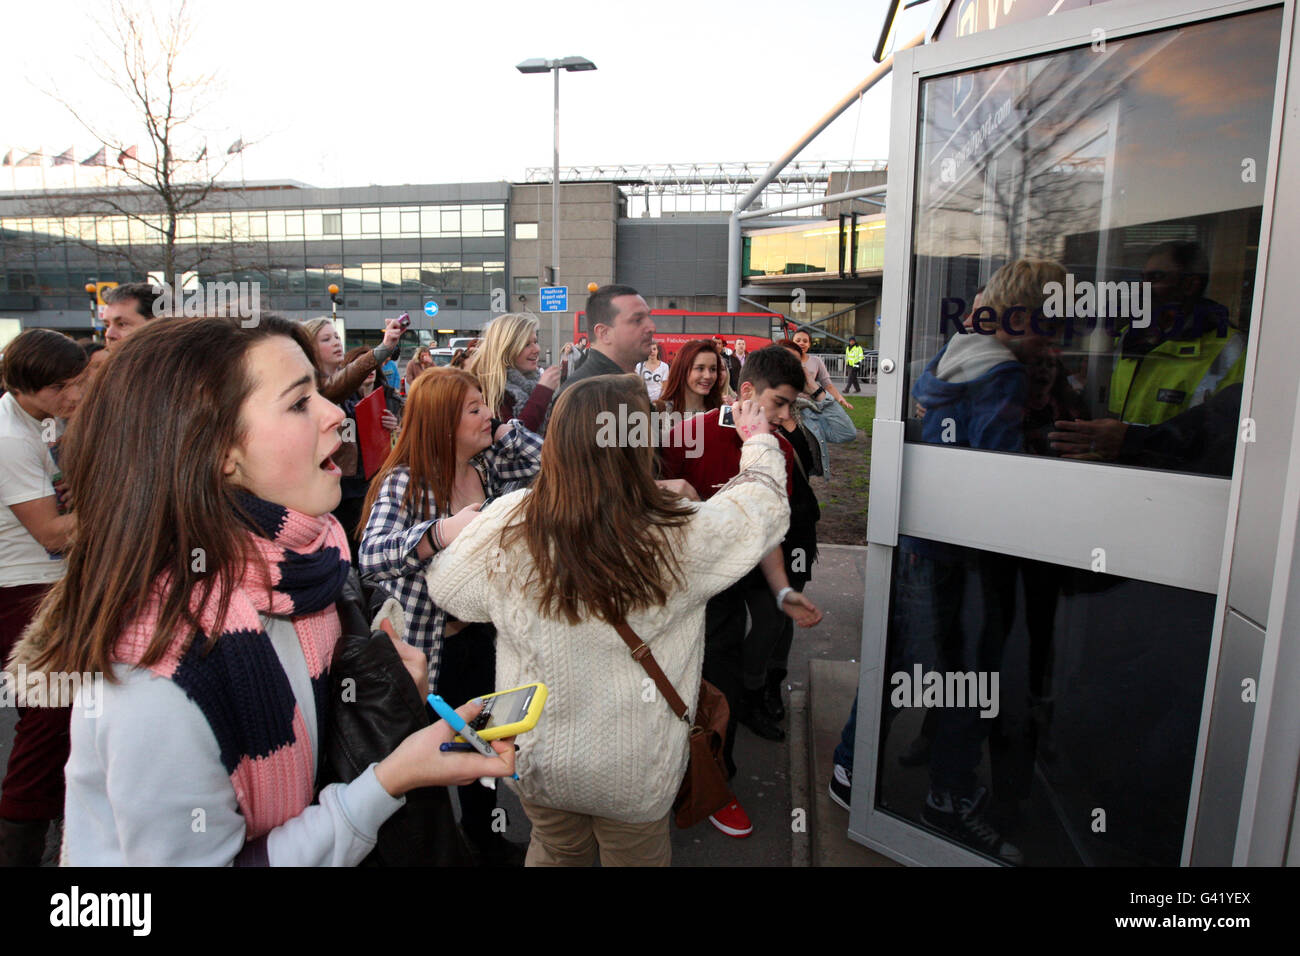 One Direction at Heathrow. Fans surround X Factor boy band stars One Direction at Heathrow Airport in London. Stock Photo